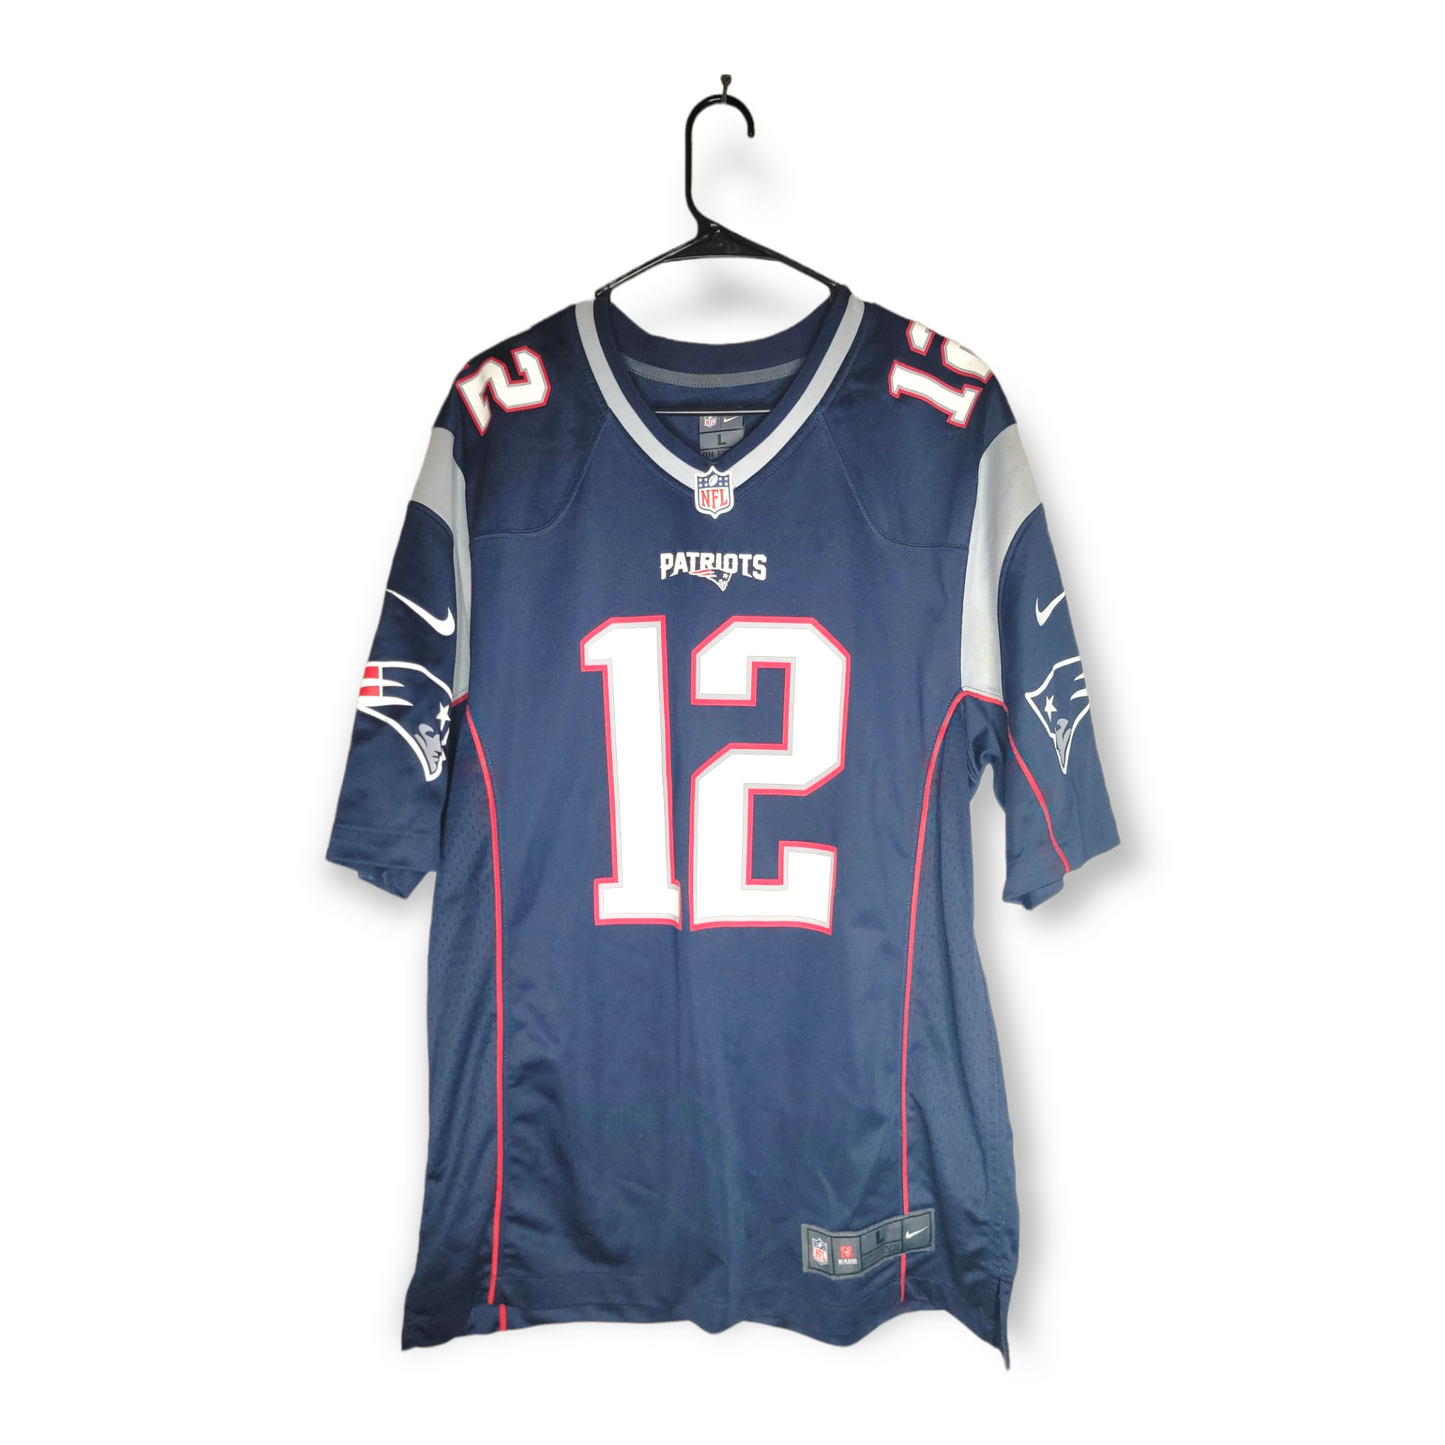 The "Goat" Jersey L